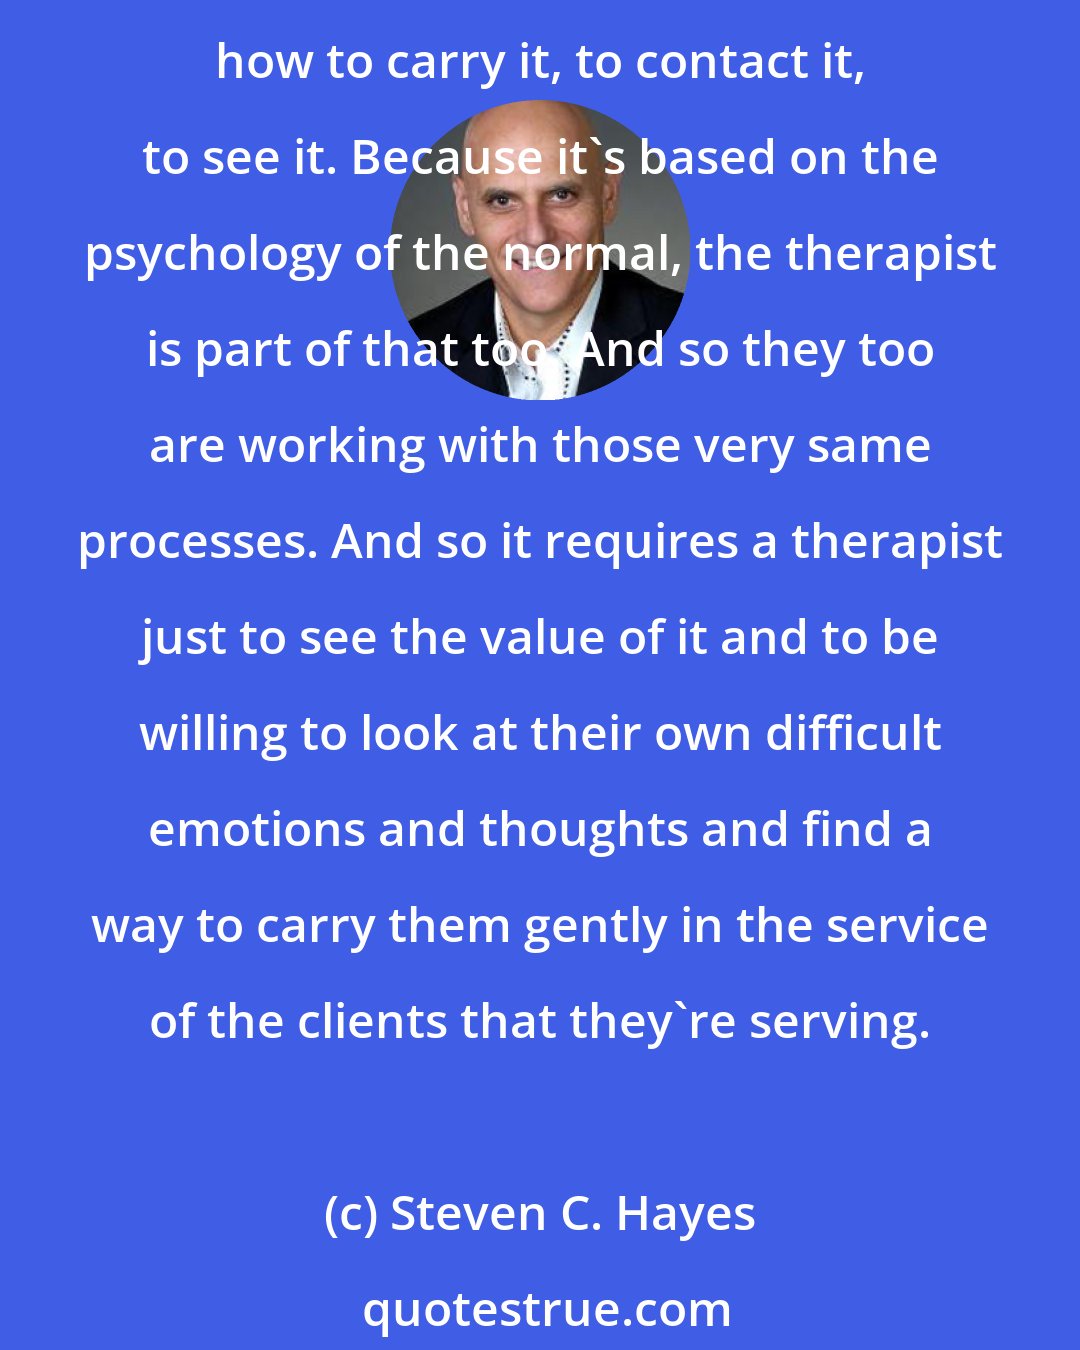 Steven C. Hayes: Your history's not going to go away; it isn't the same thing as dirt on the floor or paint peeling off the walls; it's not going to be solved in that way. It's more like learning how to carry it, to contact it, to see it. Because it's based on the psychology of the normal, the therapist is part of that too. And so they too are working with those very same processes. And so it requires a therapist just to see the value of it and to be willing to look at their own difficult emotions and thoughts and find a way to carry them gently in the service of the clients that they're serving.